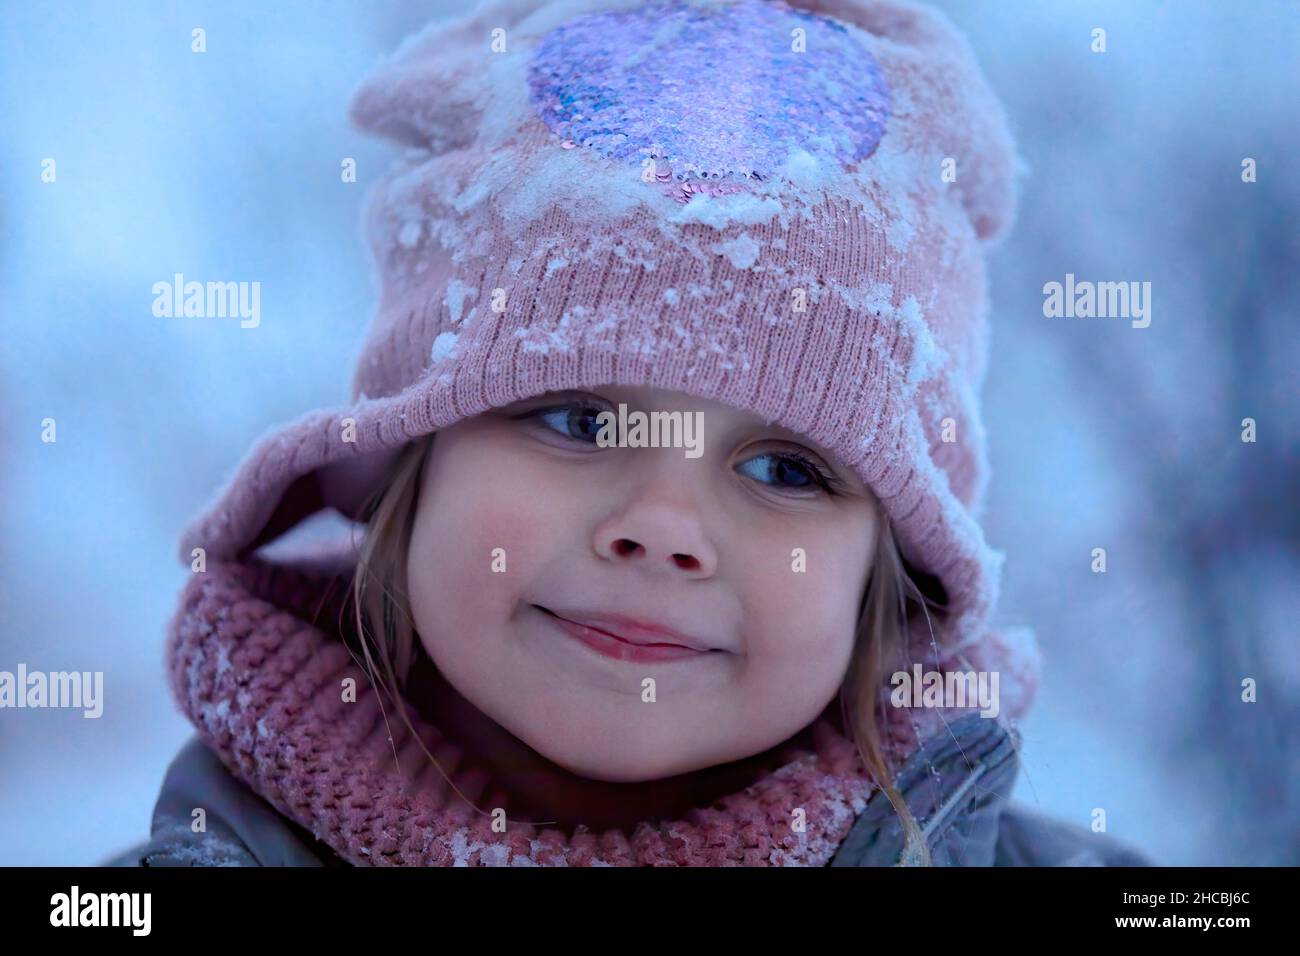 Cute smiling girl wearing knit hat with snow Stock Photo - Alamy